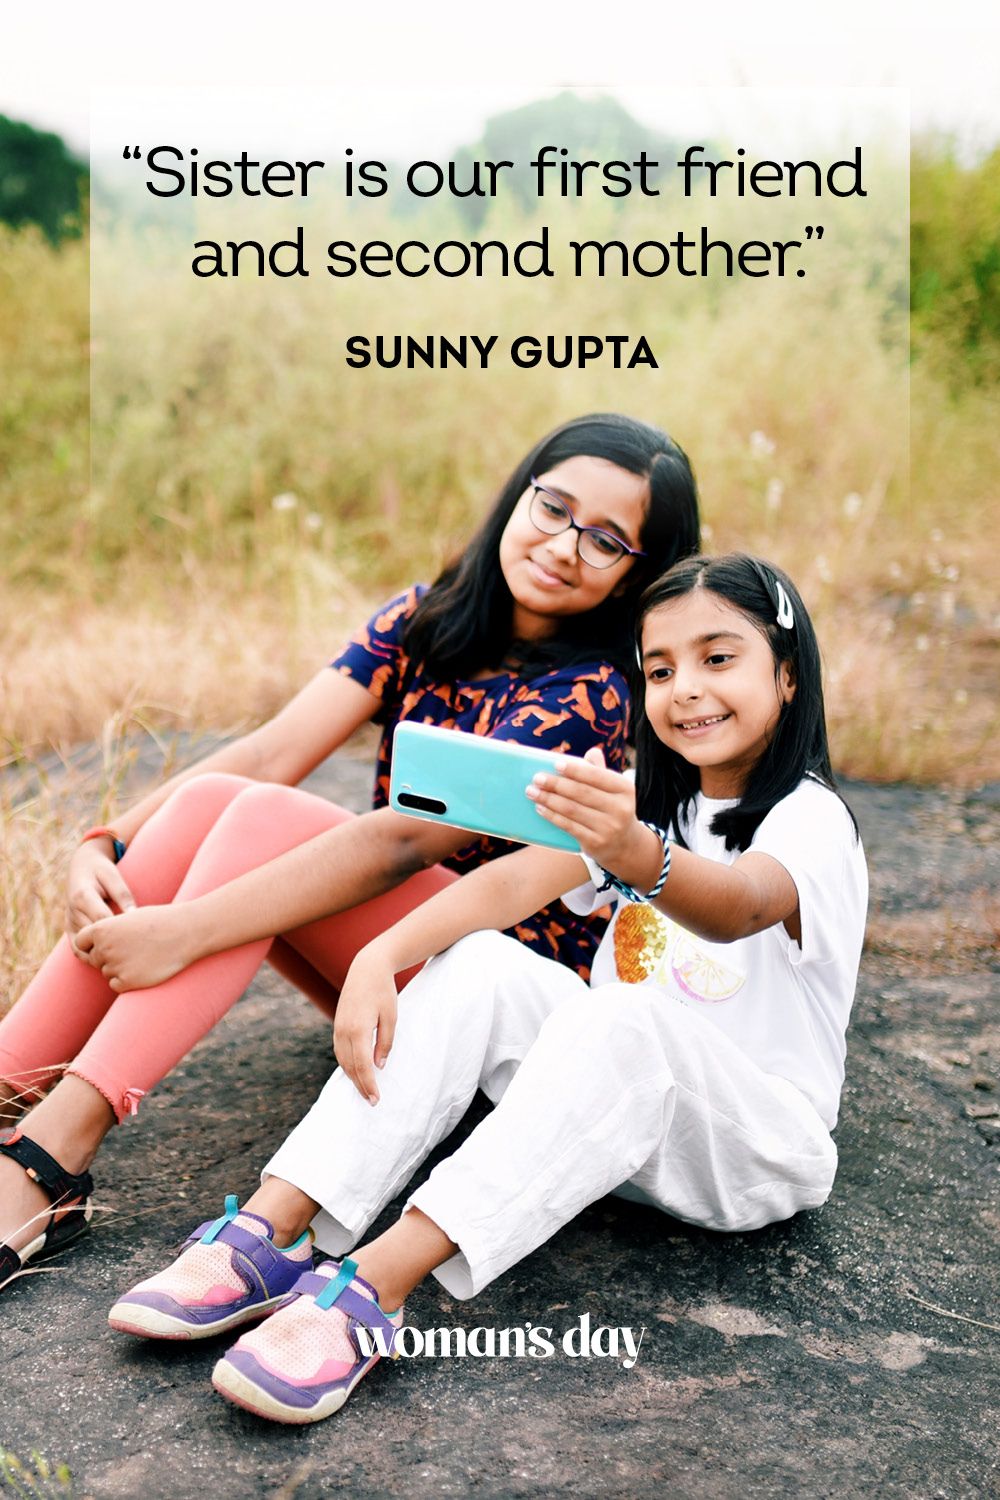 quotes about sister bond